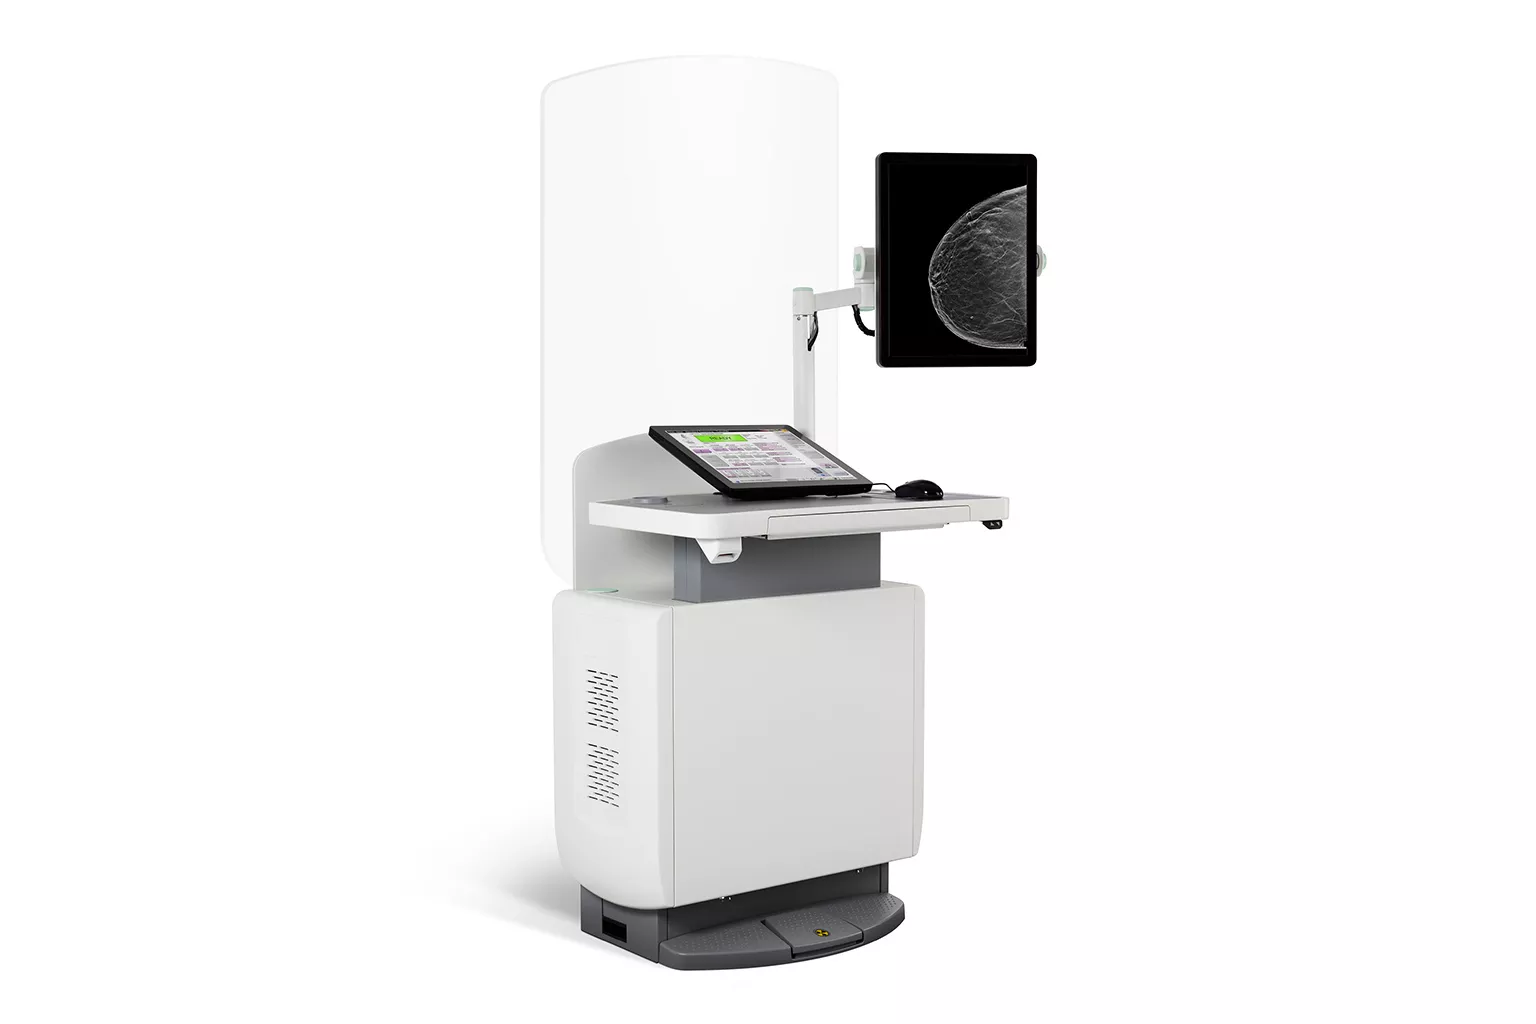 Clarity HD™ Imaging Technology device